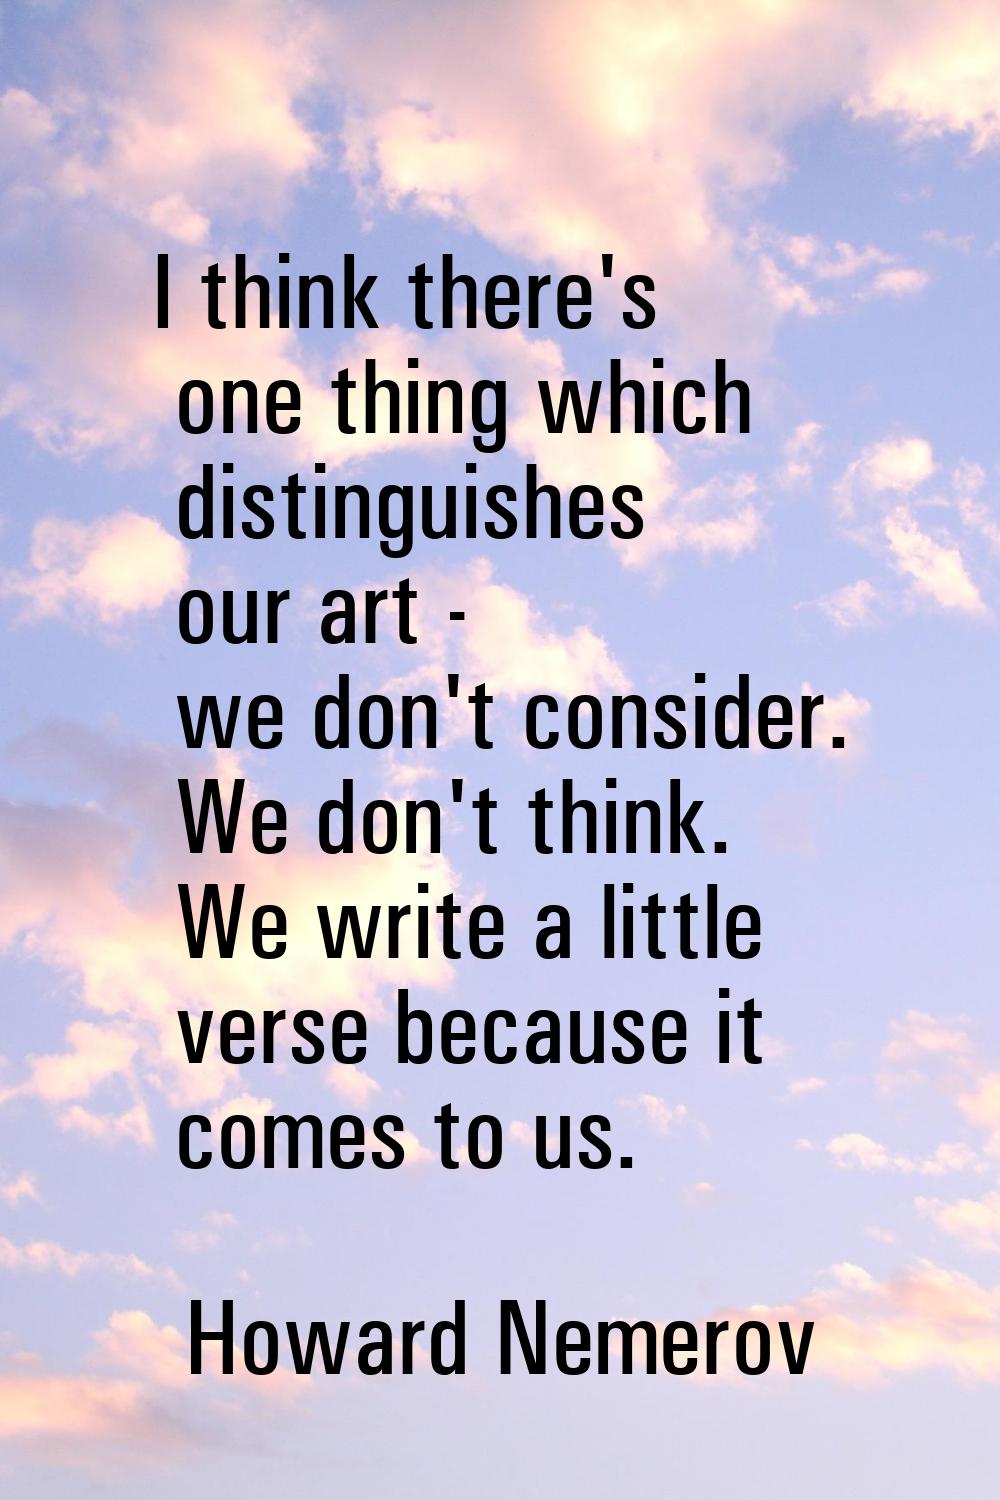 I think there's one thing which distinguishes our art - we don't consider. We don't think. We write